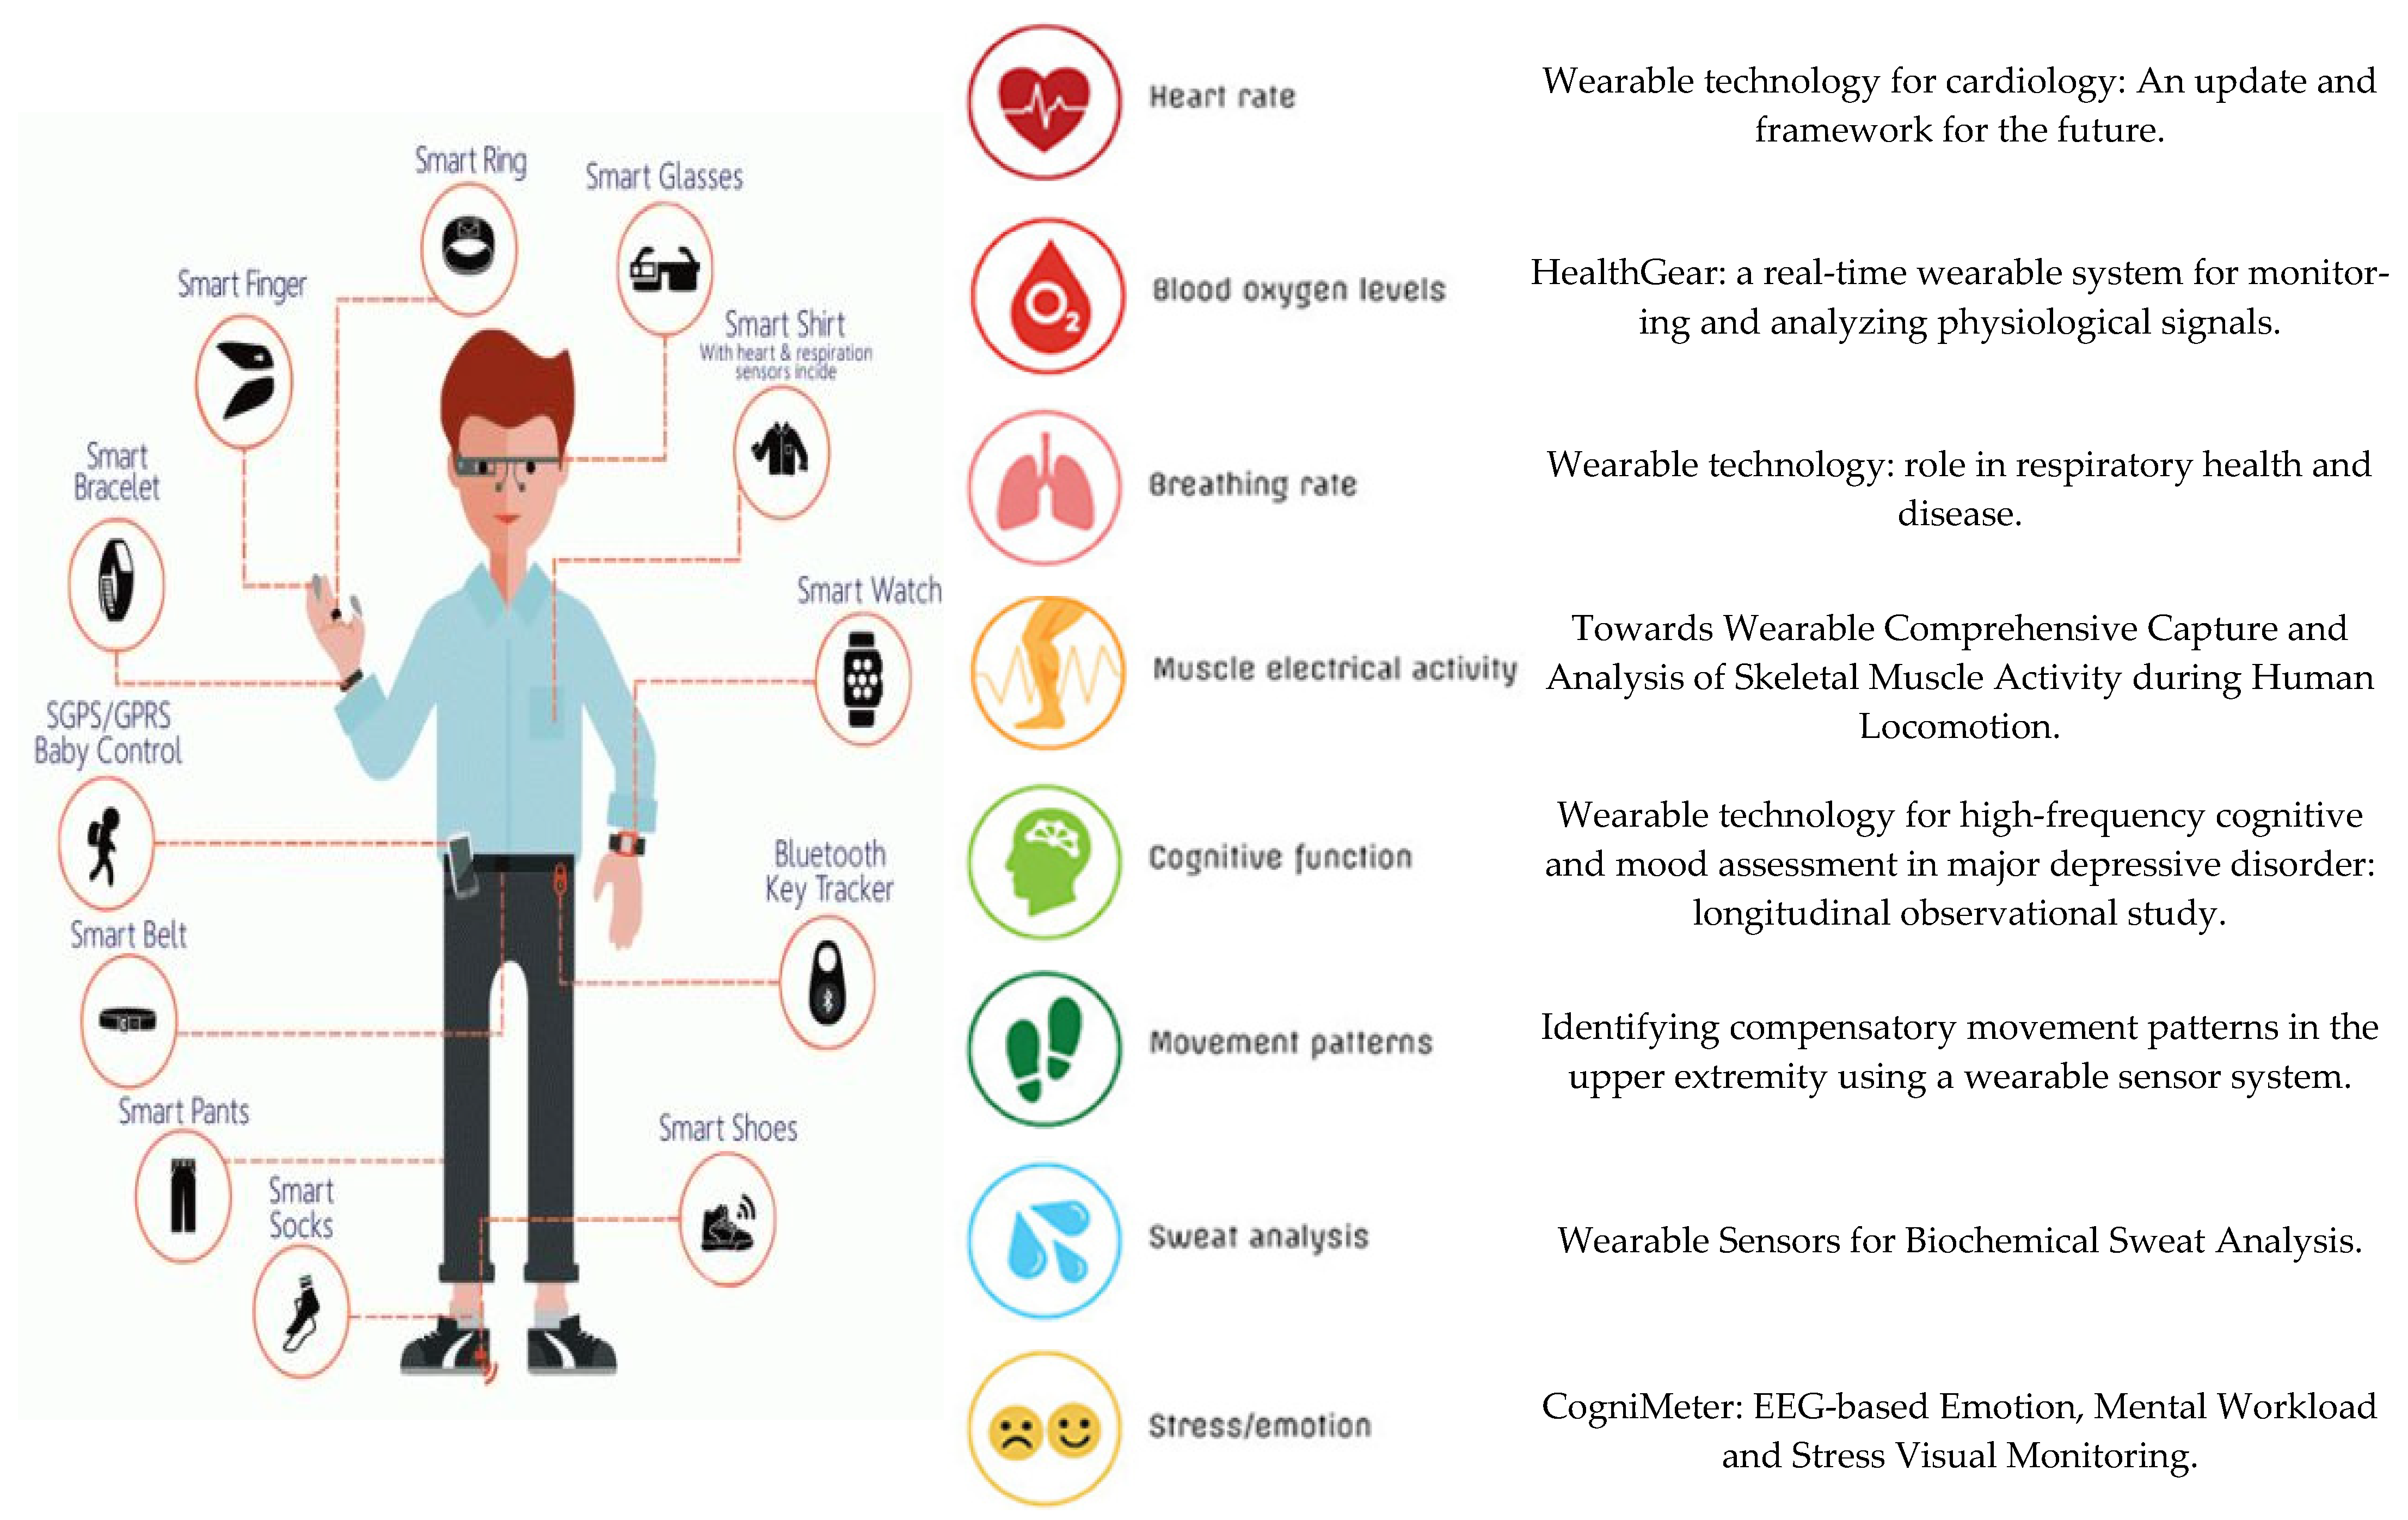 Wearable technology: role in respiratory health and disease